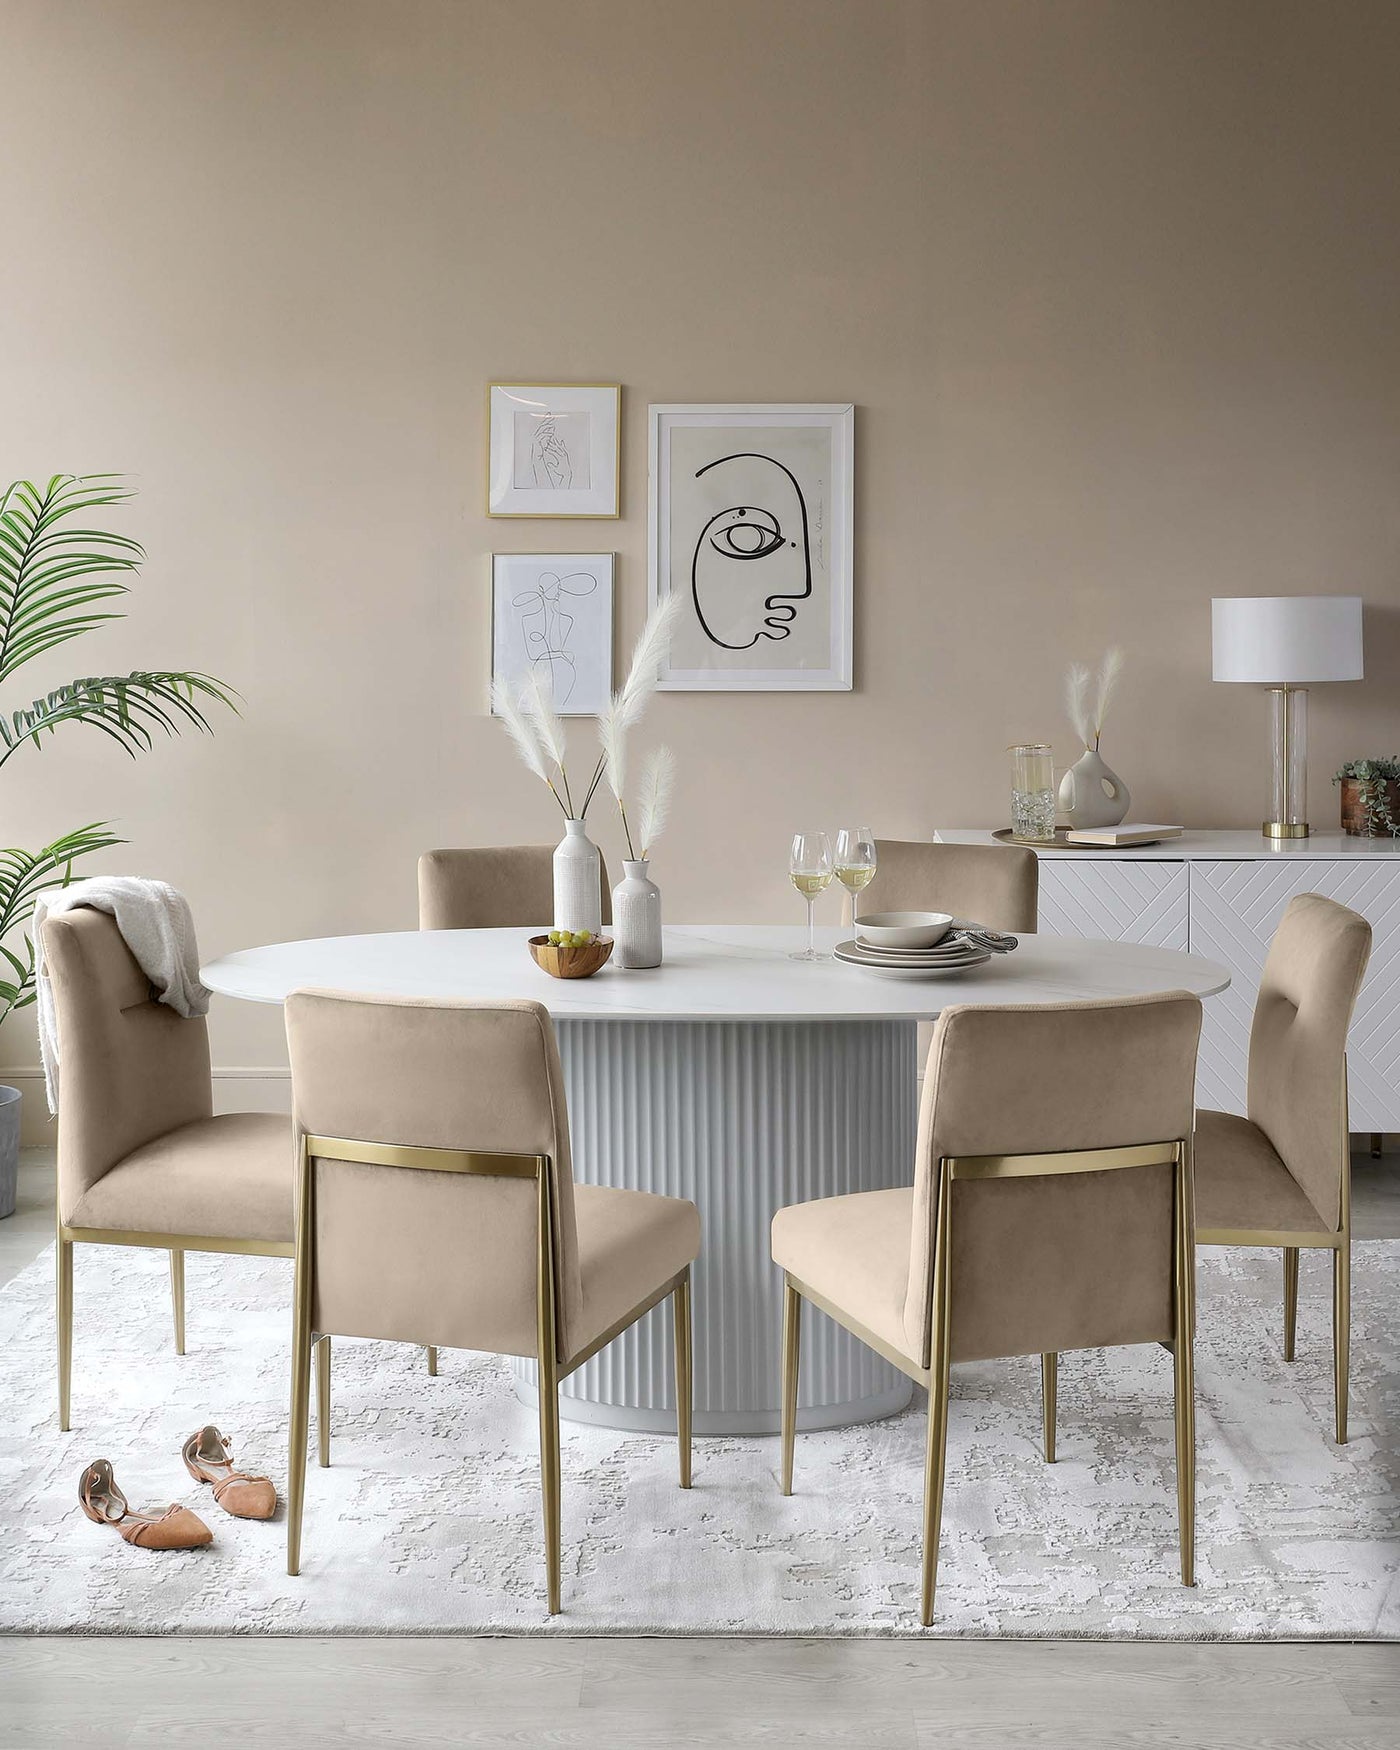 Elegant dining room furniture set featuring a modern round table with a fluted pattern on its pedestal base, finished in white. Accompanied by four plush, taupe upholstered chairs with sleek golden metal legs, positioned on a textured white area rug.